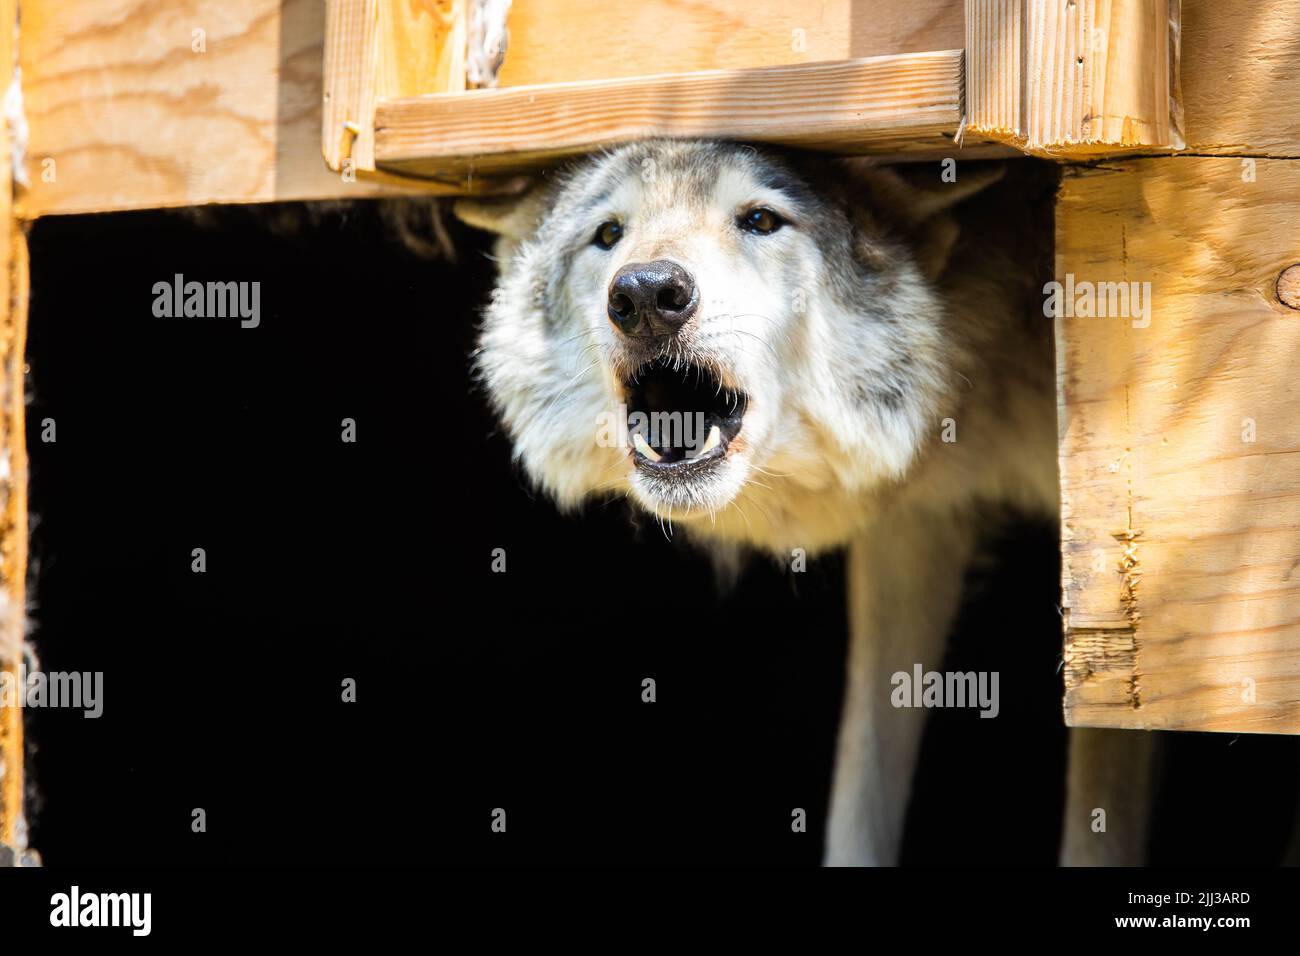 Howling wolf dog close up portrait angry open mouth Stock Photo - Alamy